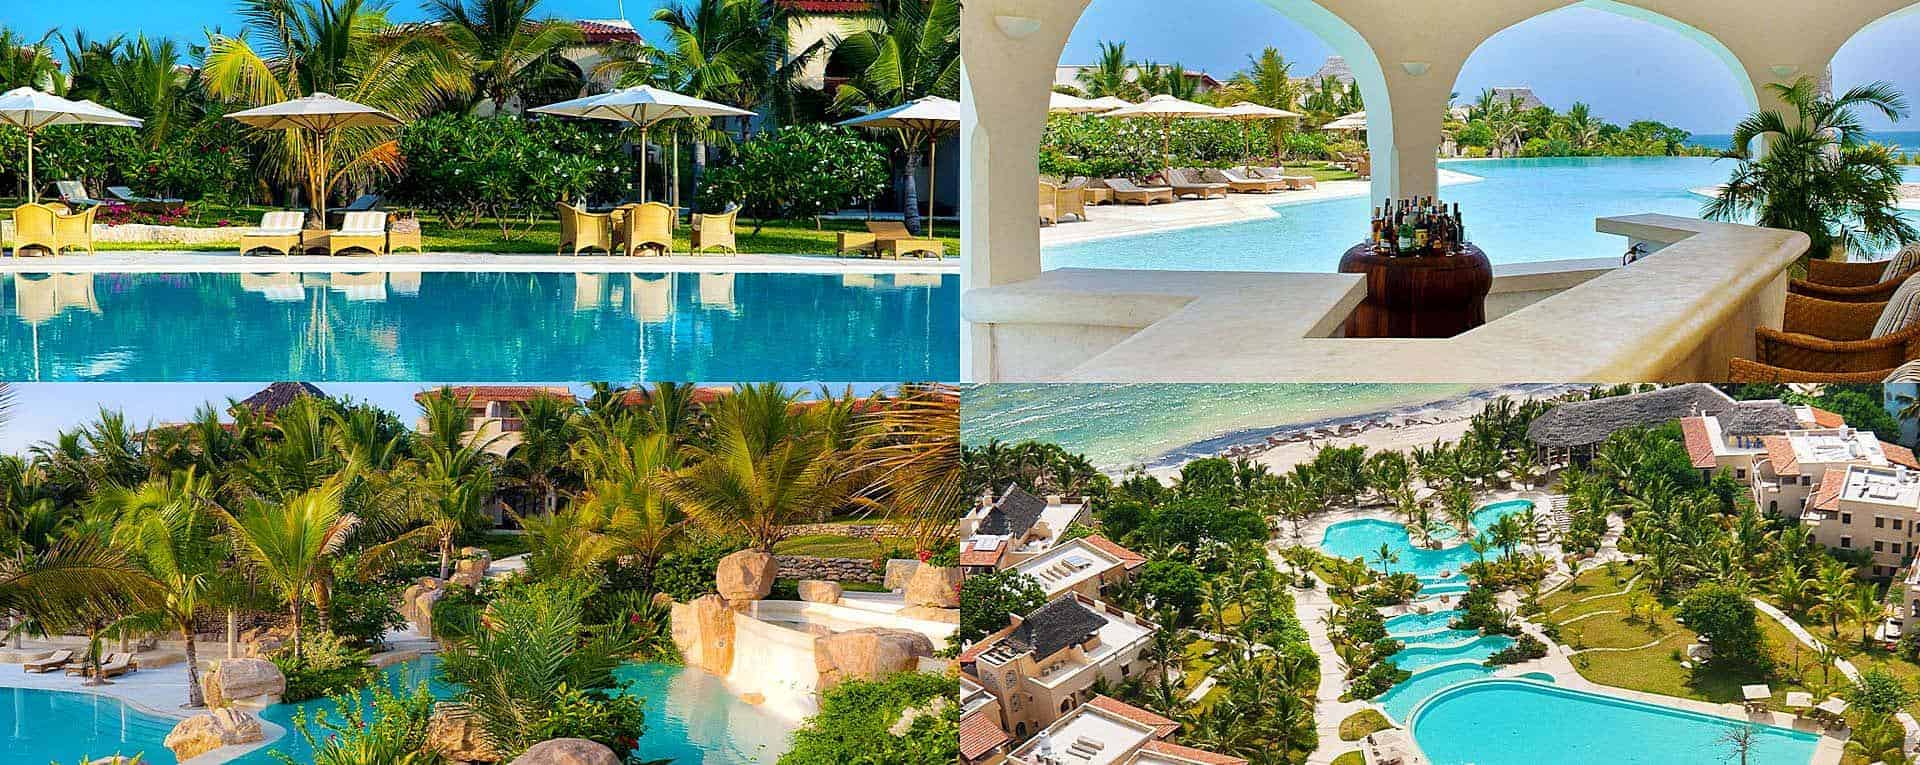 Photos, Images & Pictures For Swahili Beach Resort In Mombasa, Kenya - AfricanMecca Safaris & Tours